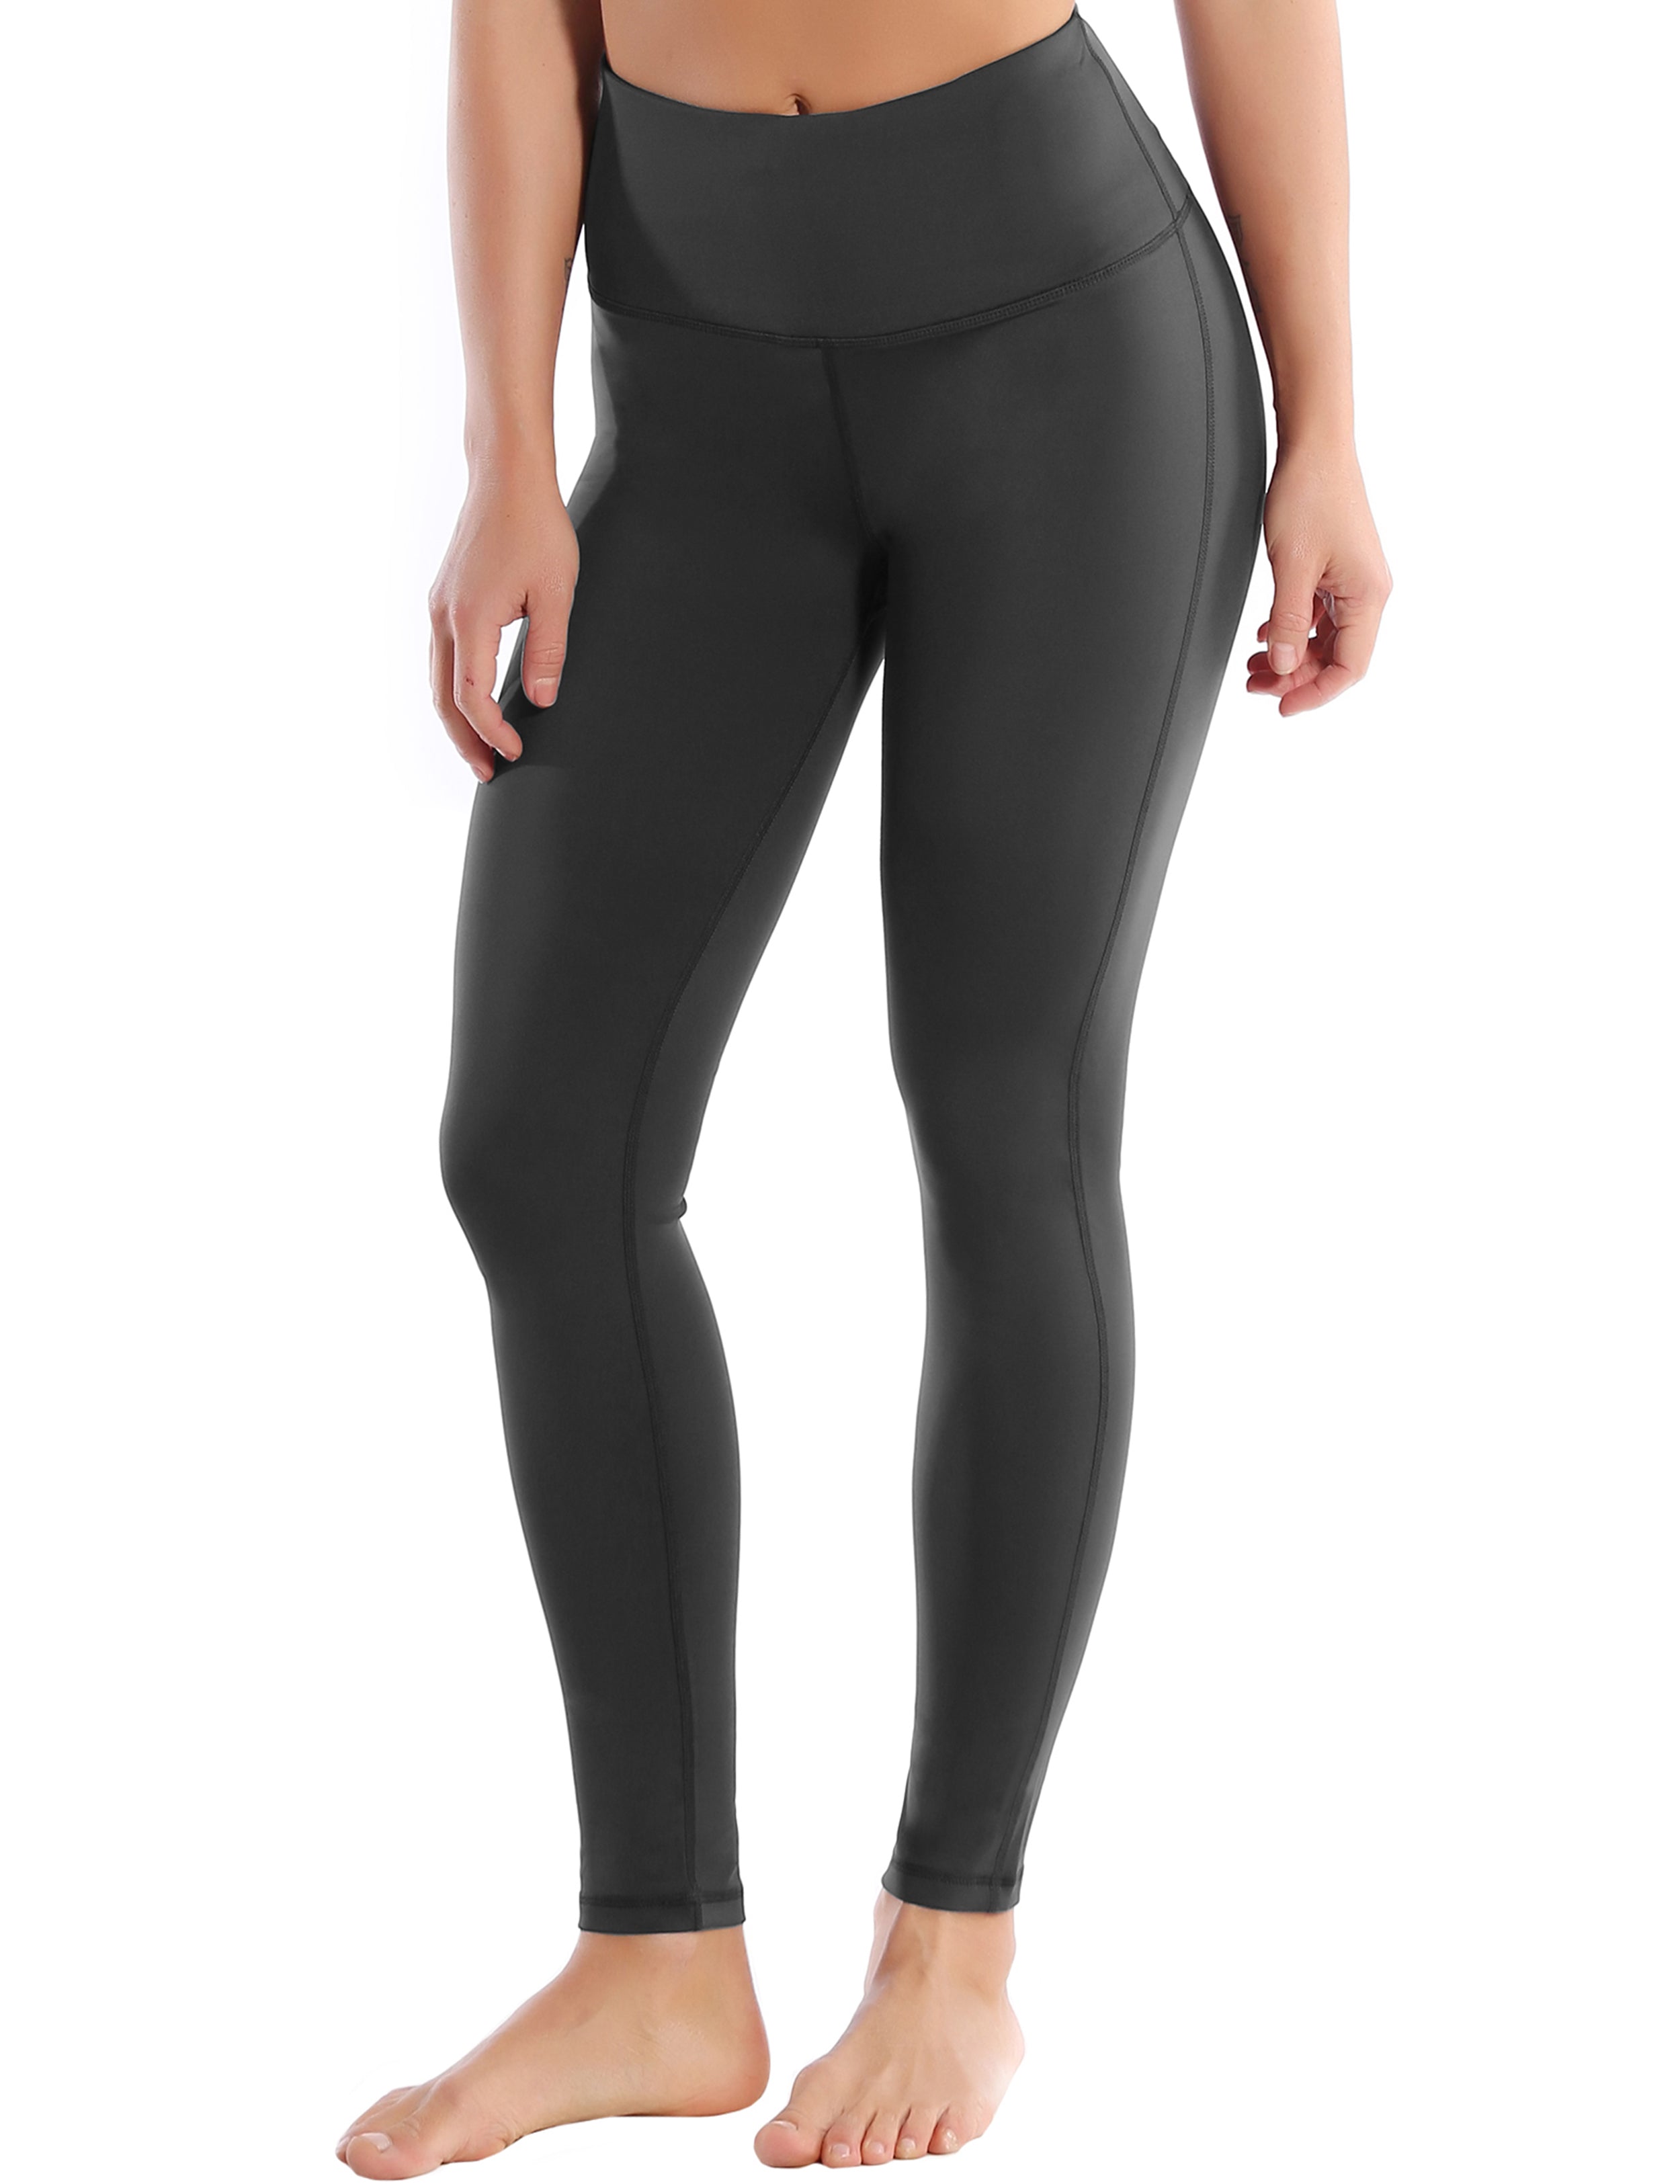 High Waist Side Line Biking Pants shadowcharcoal Side Line is Make Your Legs Look Longer and Thinner 75%Nylon/25%Spandex Fabric doesn't attract lint easily 4-way stretch No see-through Moisture-wicking Tummy control Inner pocket Two lengths